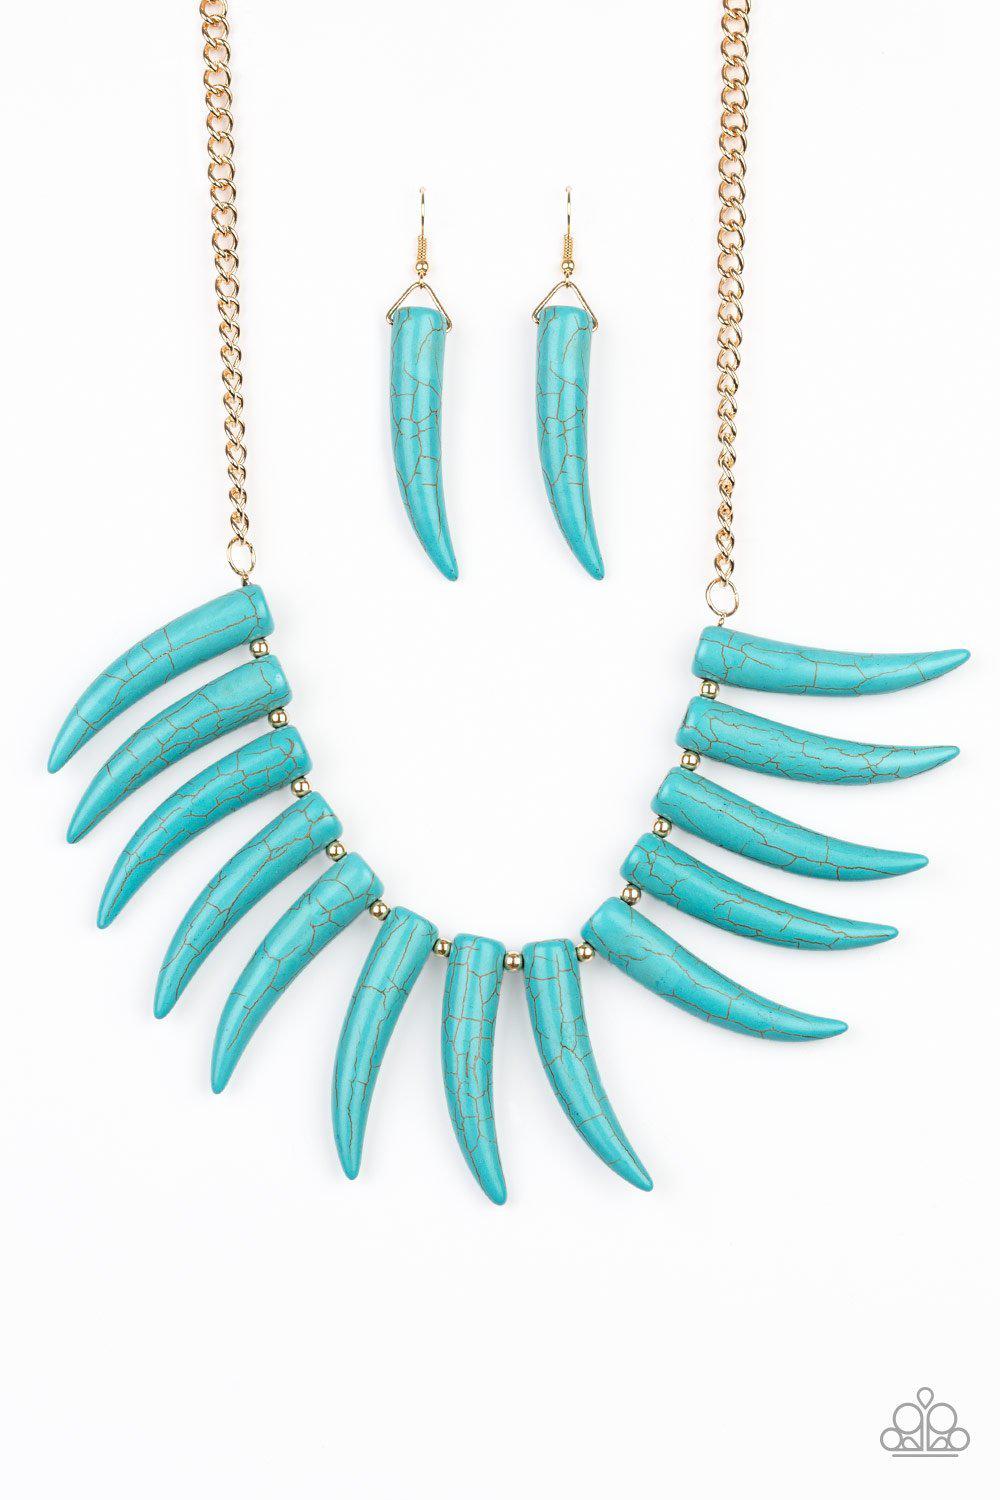 Tusk Tundra Turquoise Blue Necklace - Paparazzi Accessories LOTP Exclusive August 2020-CarasShop.com - $5 Jewelry by Cara Jewels